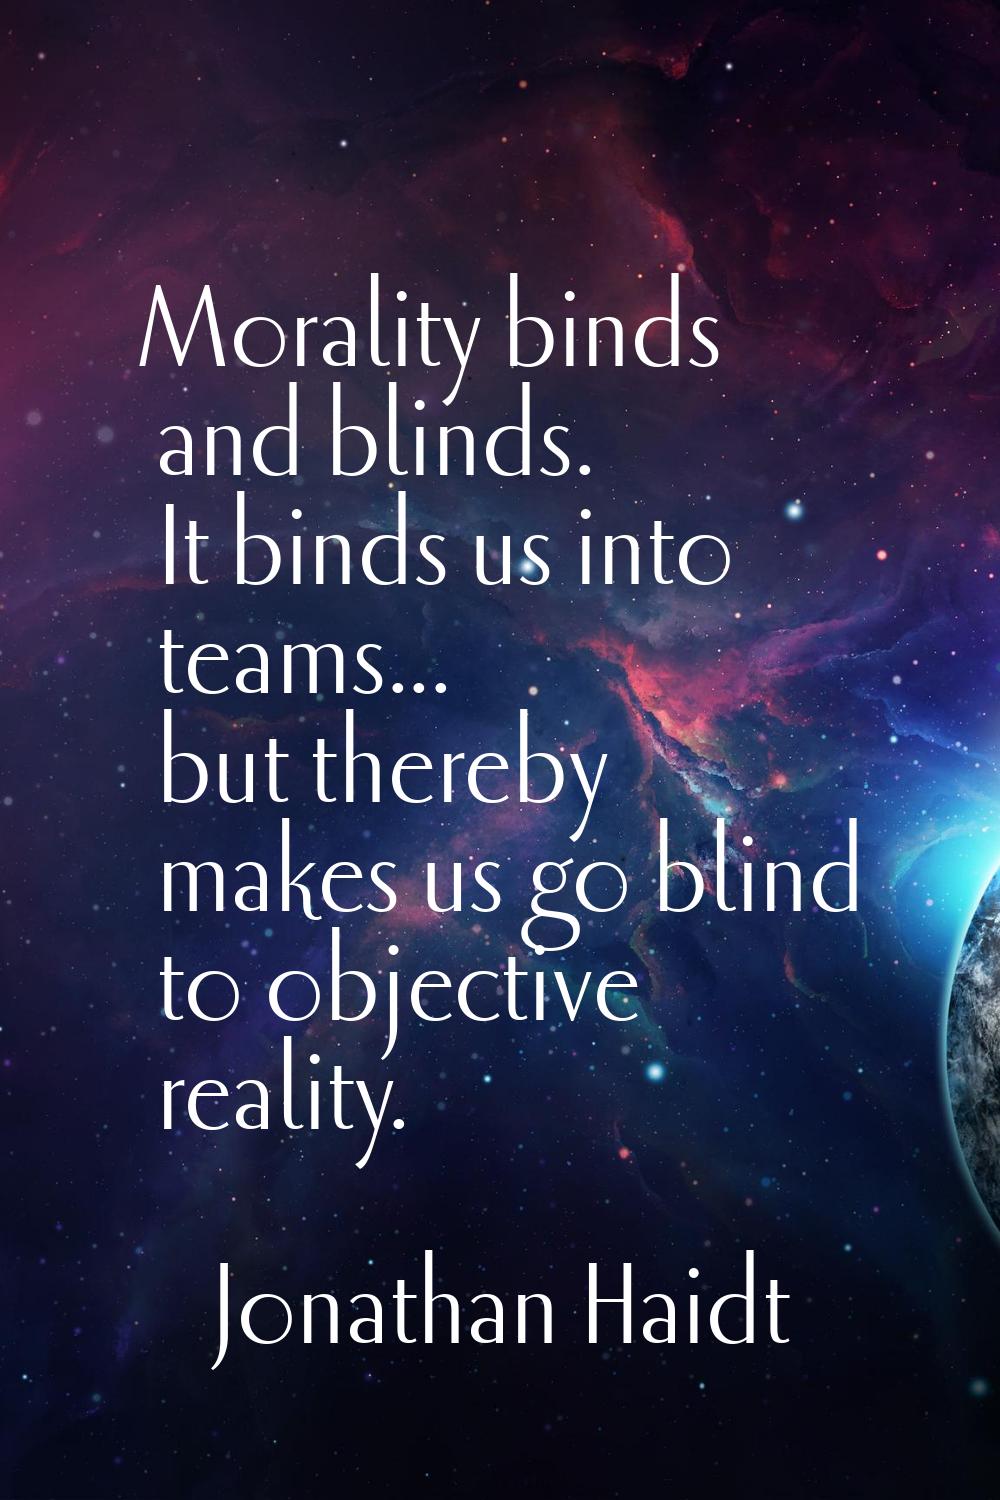 Morality binds and blinds. It binds us into teams... but thereby makes us go blind to objective rea